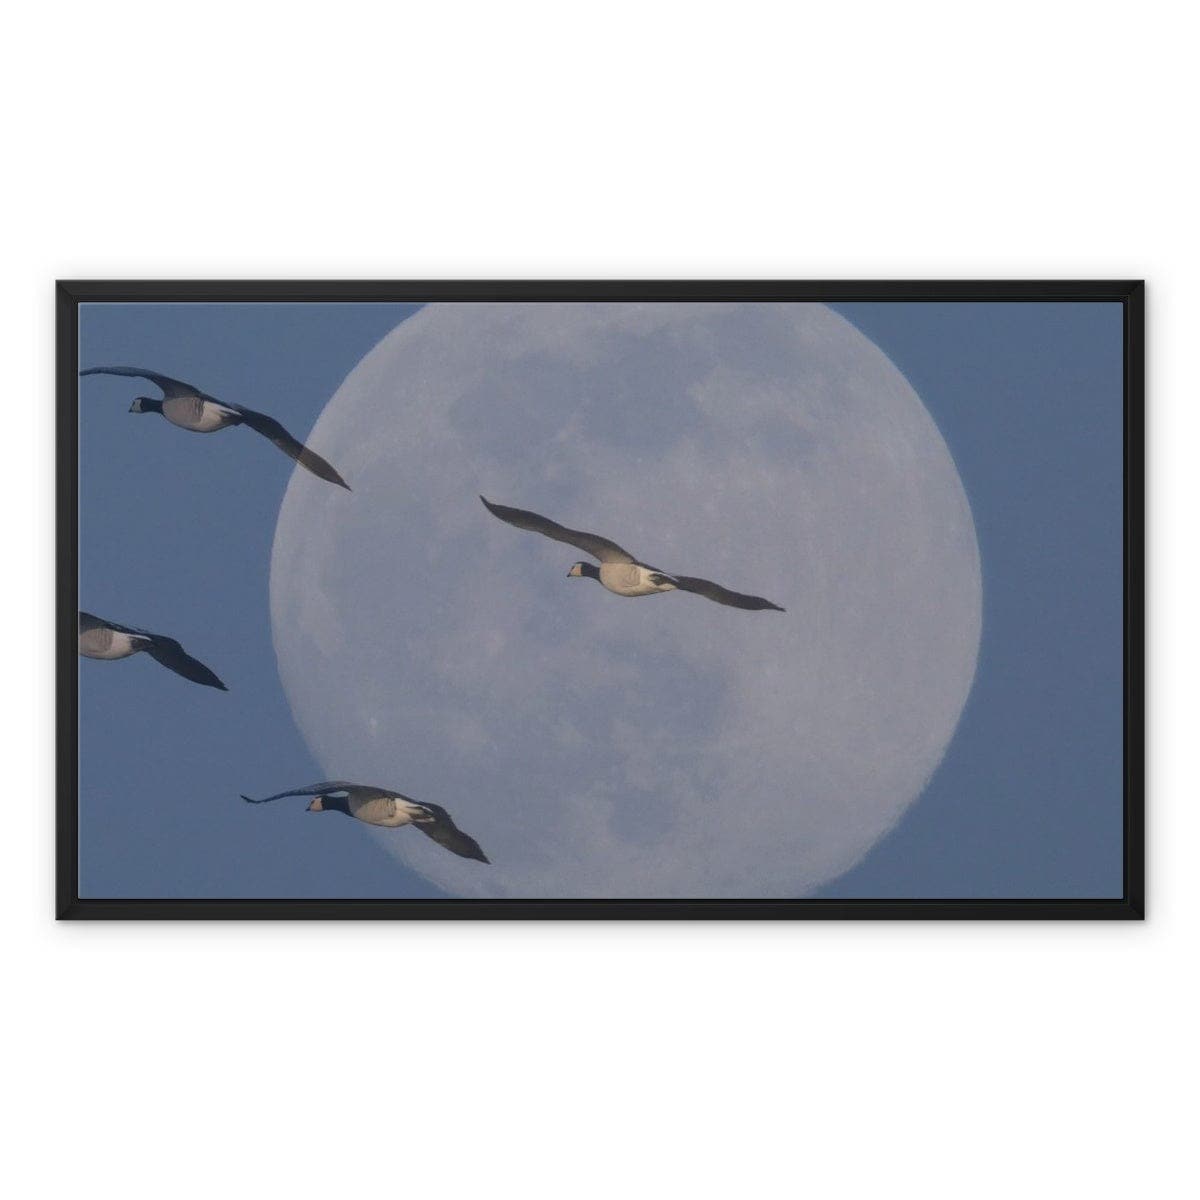 Fly me to the moon Framed Canvas, by Sensus studio